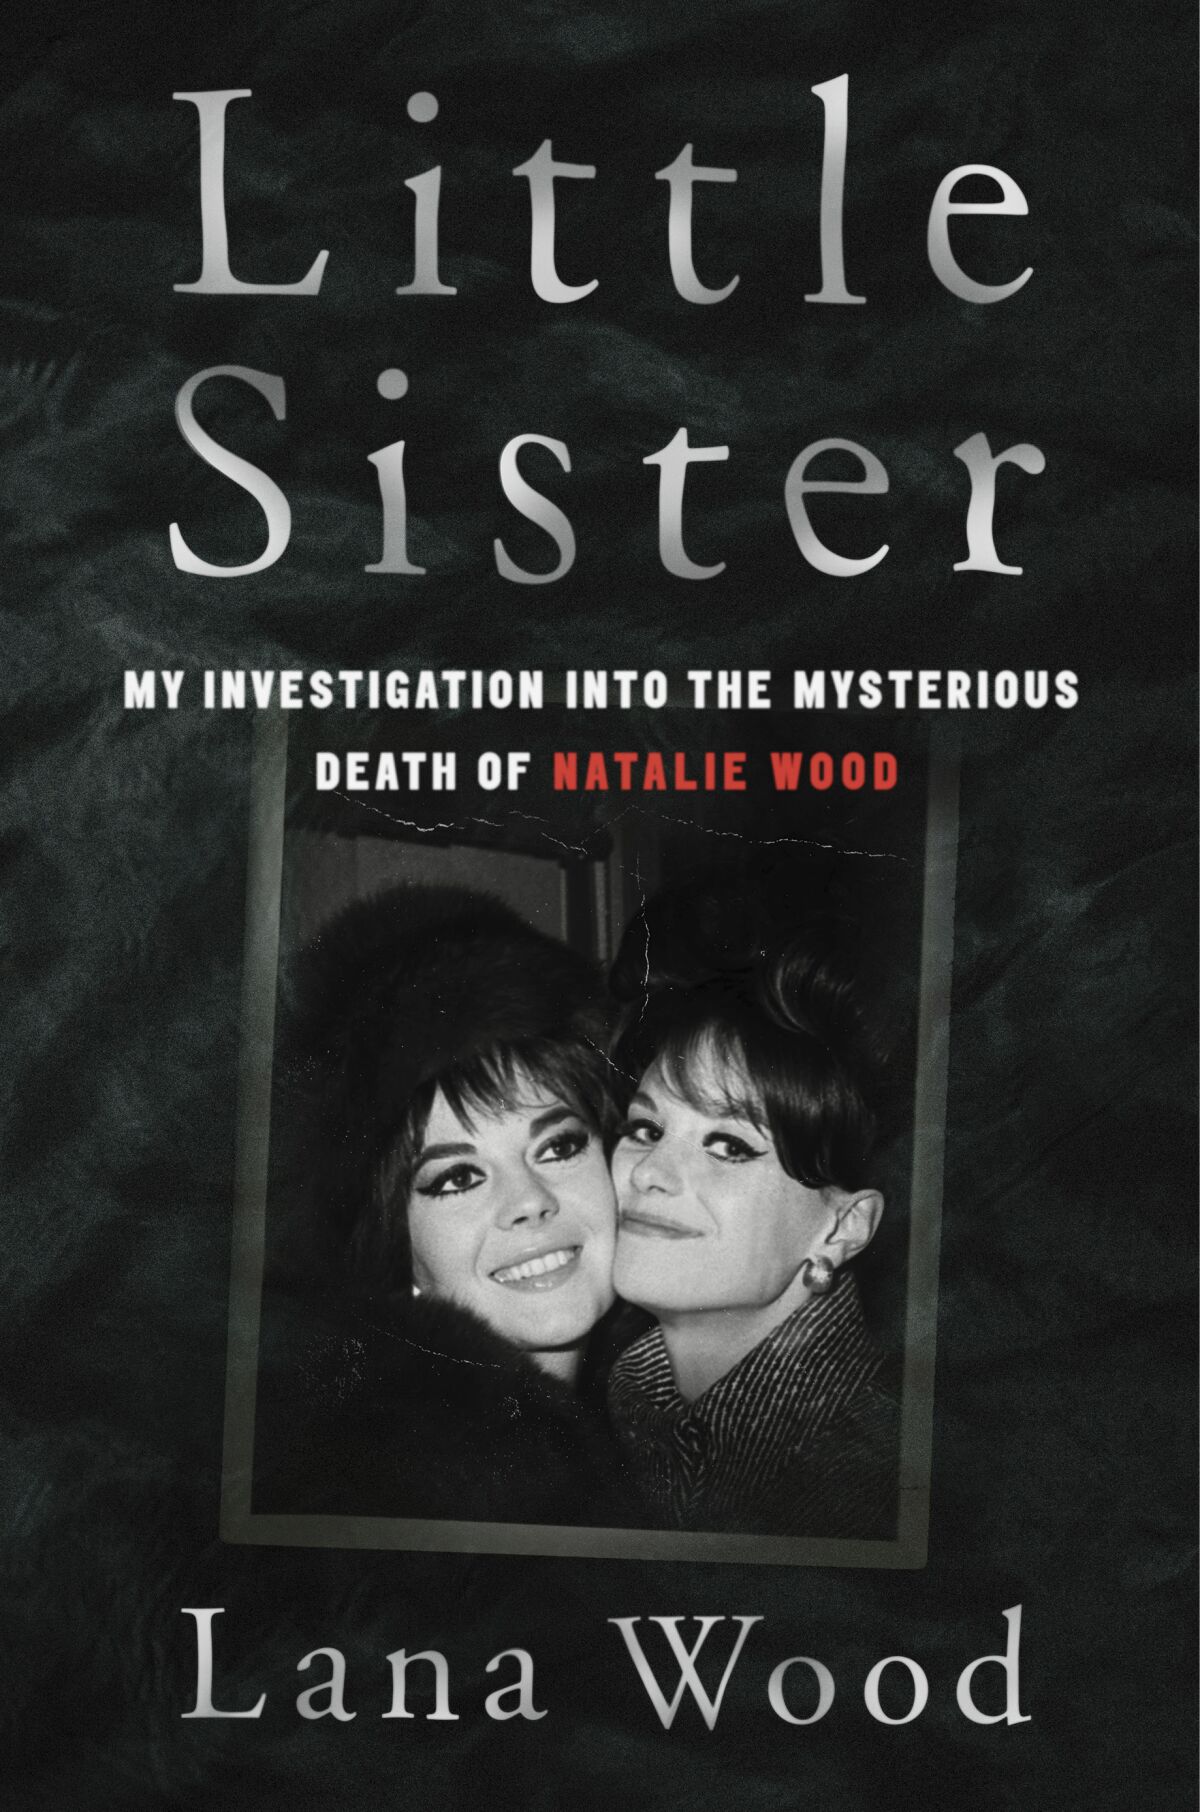 This cover image released by Dey Street Books shows "Little Sister: My Investigation into the Mysterious Death of Natalie Wood" by Lana Wood. (Dey Street Books via AP)